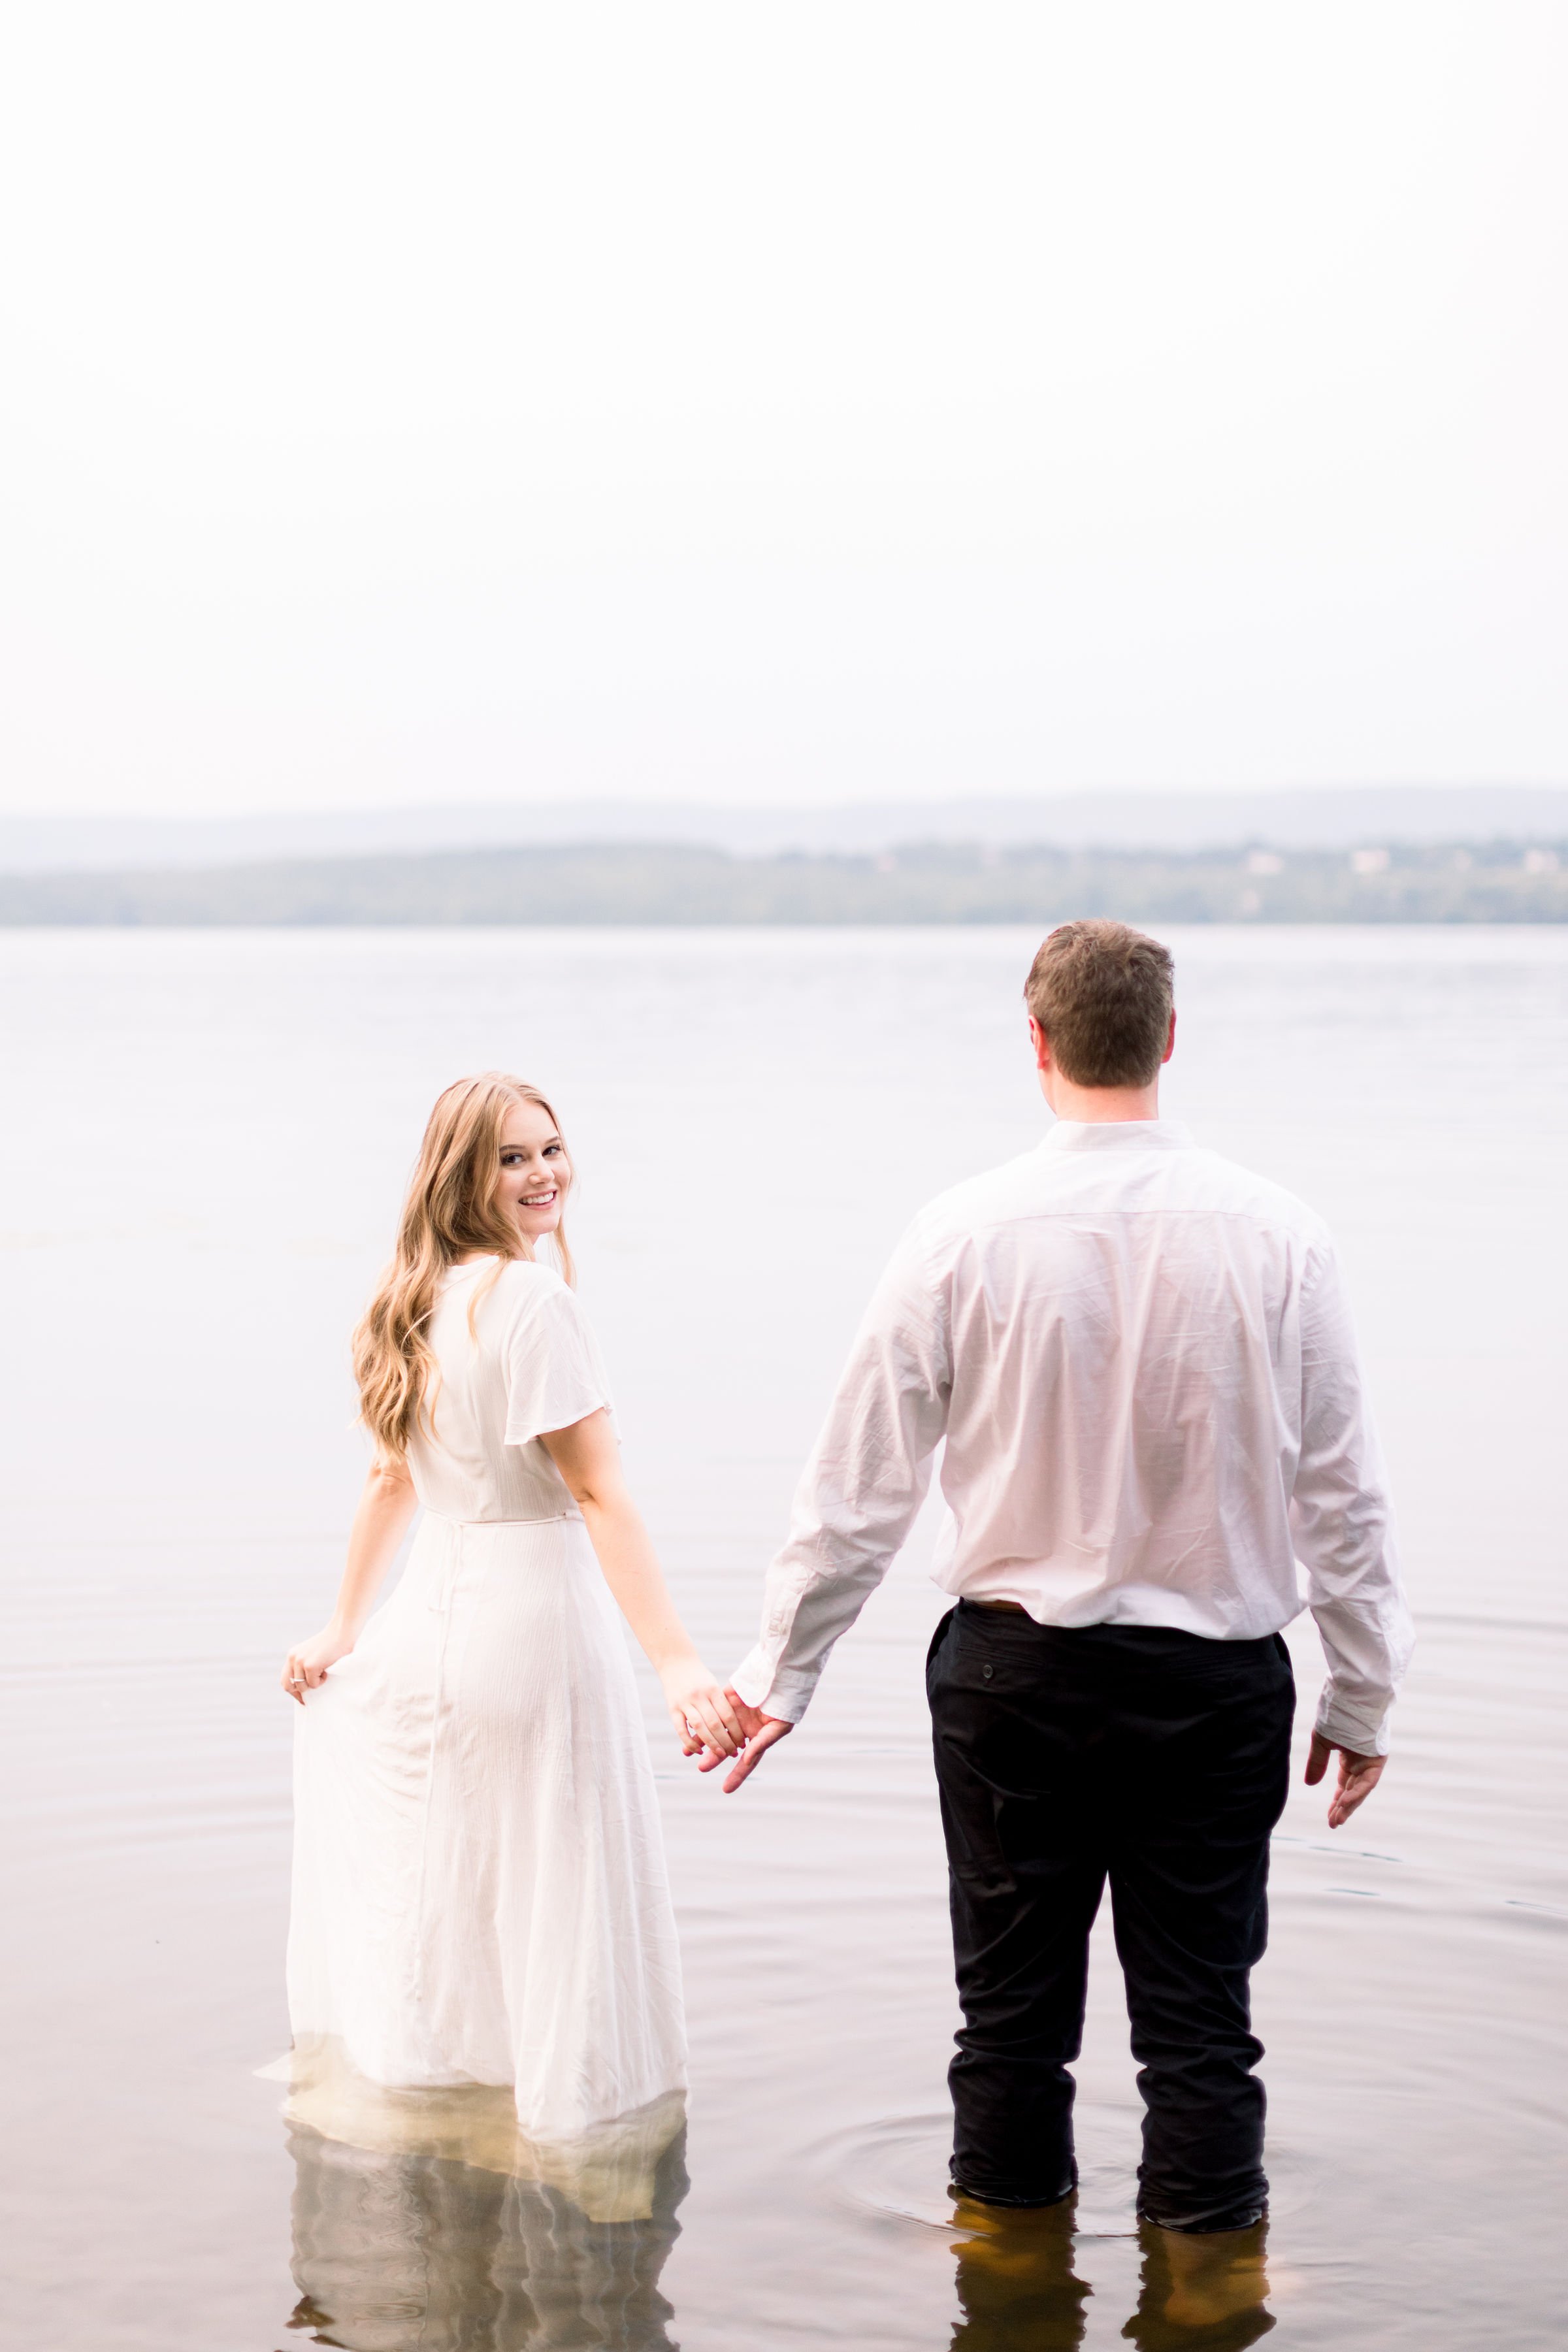  A woman looks over her shoulder while holding hands with her fiance in a lake by Chelsea Mason Photography. fiances she said yes lake pics #ChelseaMasonPhotography #ChelseaMasonEngagements #PinheysPointEngagements #OttawaEngagementPhotography 